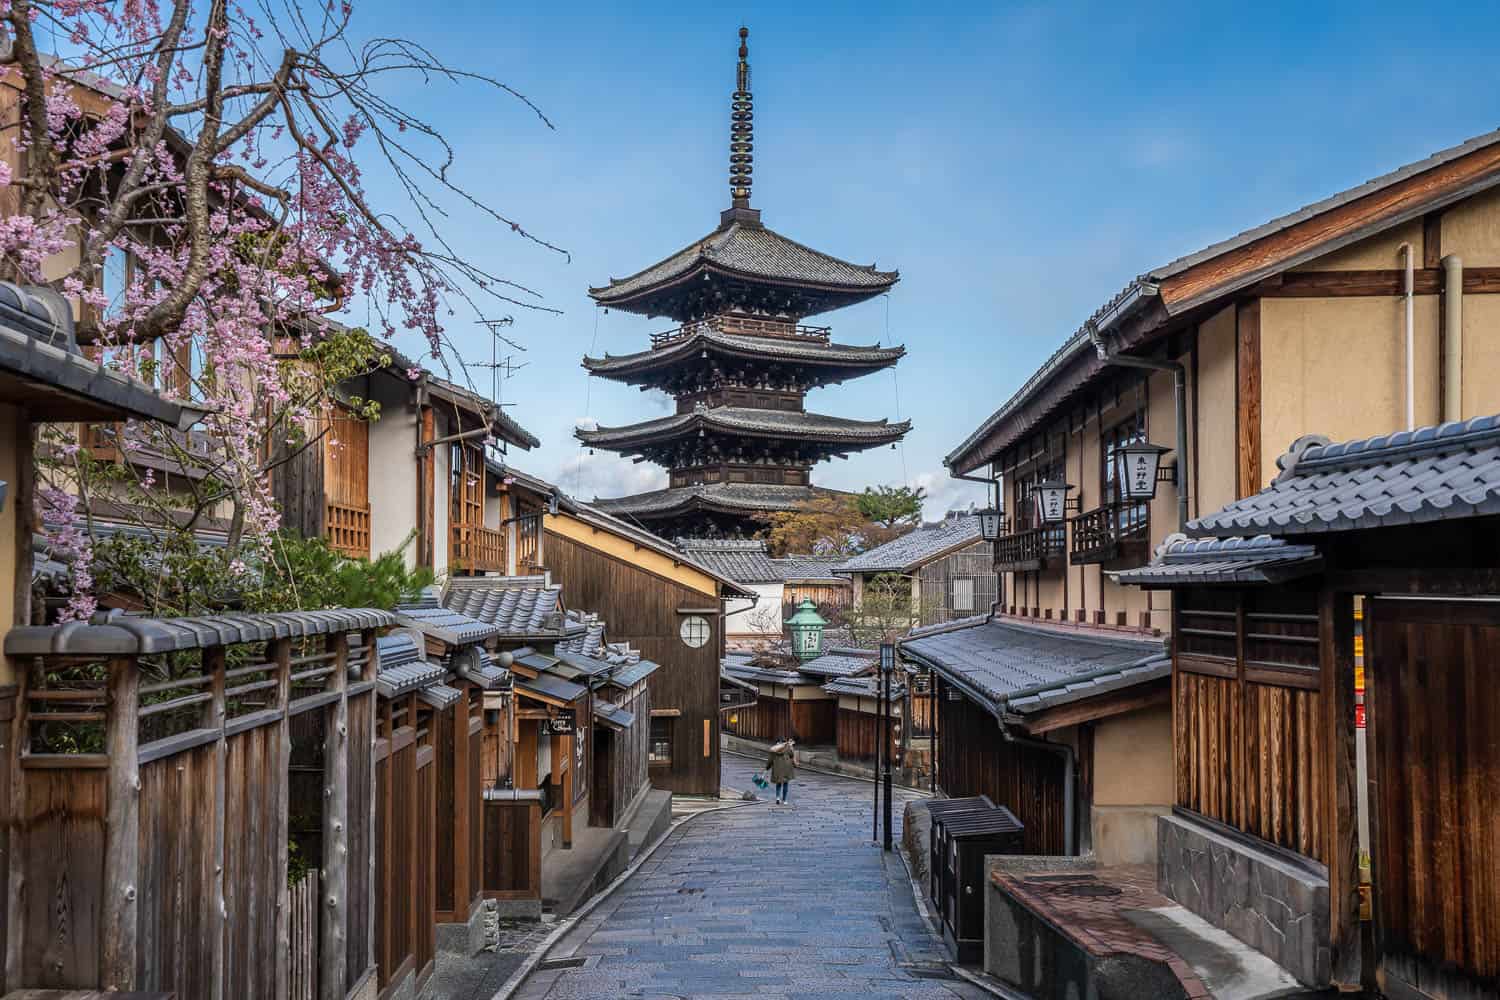 26 Things to Do in Kyoto, Japan